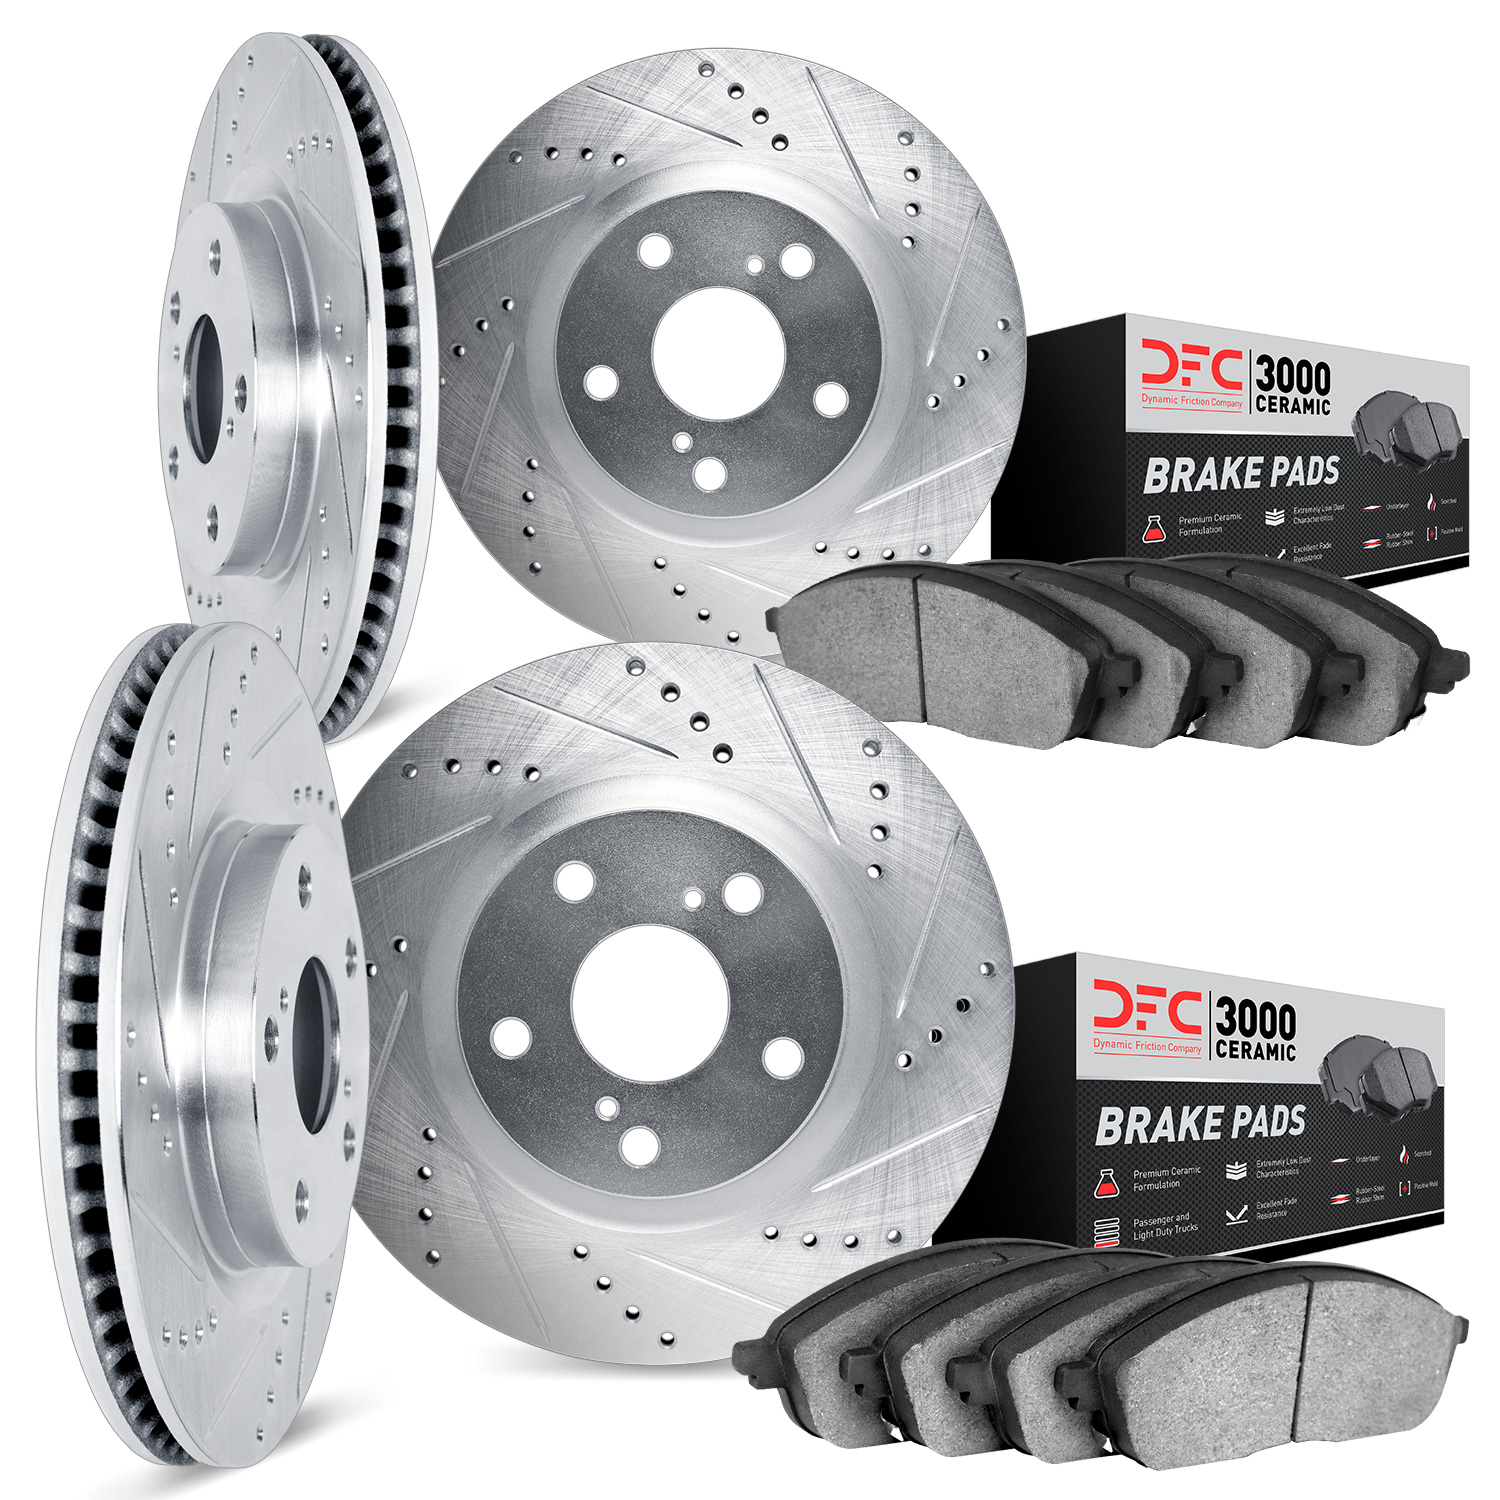 7304-54061 Drilled/Slotted Brake Rotor with 3000-Series Ceramic Brake Pads Kit [Silver], 2007-2014 Ford/Lincoln/Mercury/Mazda, P